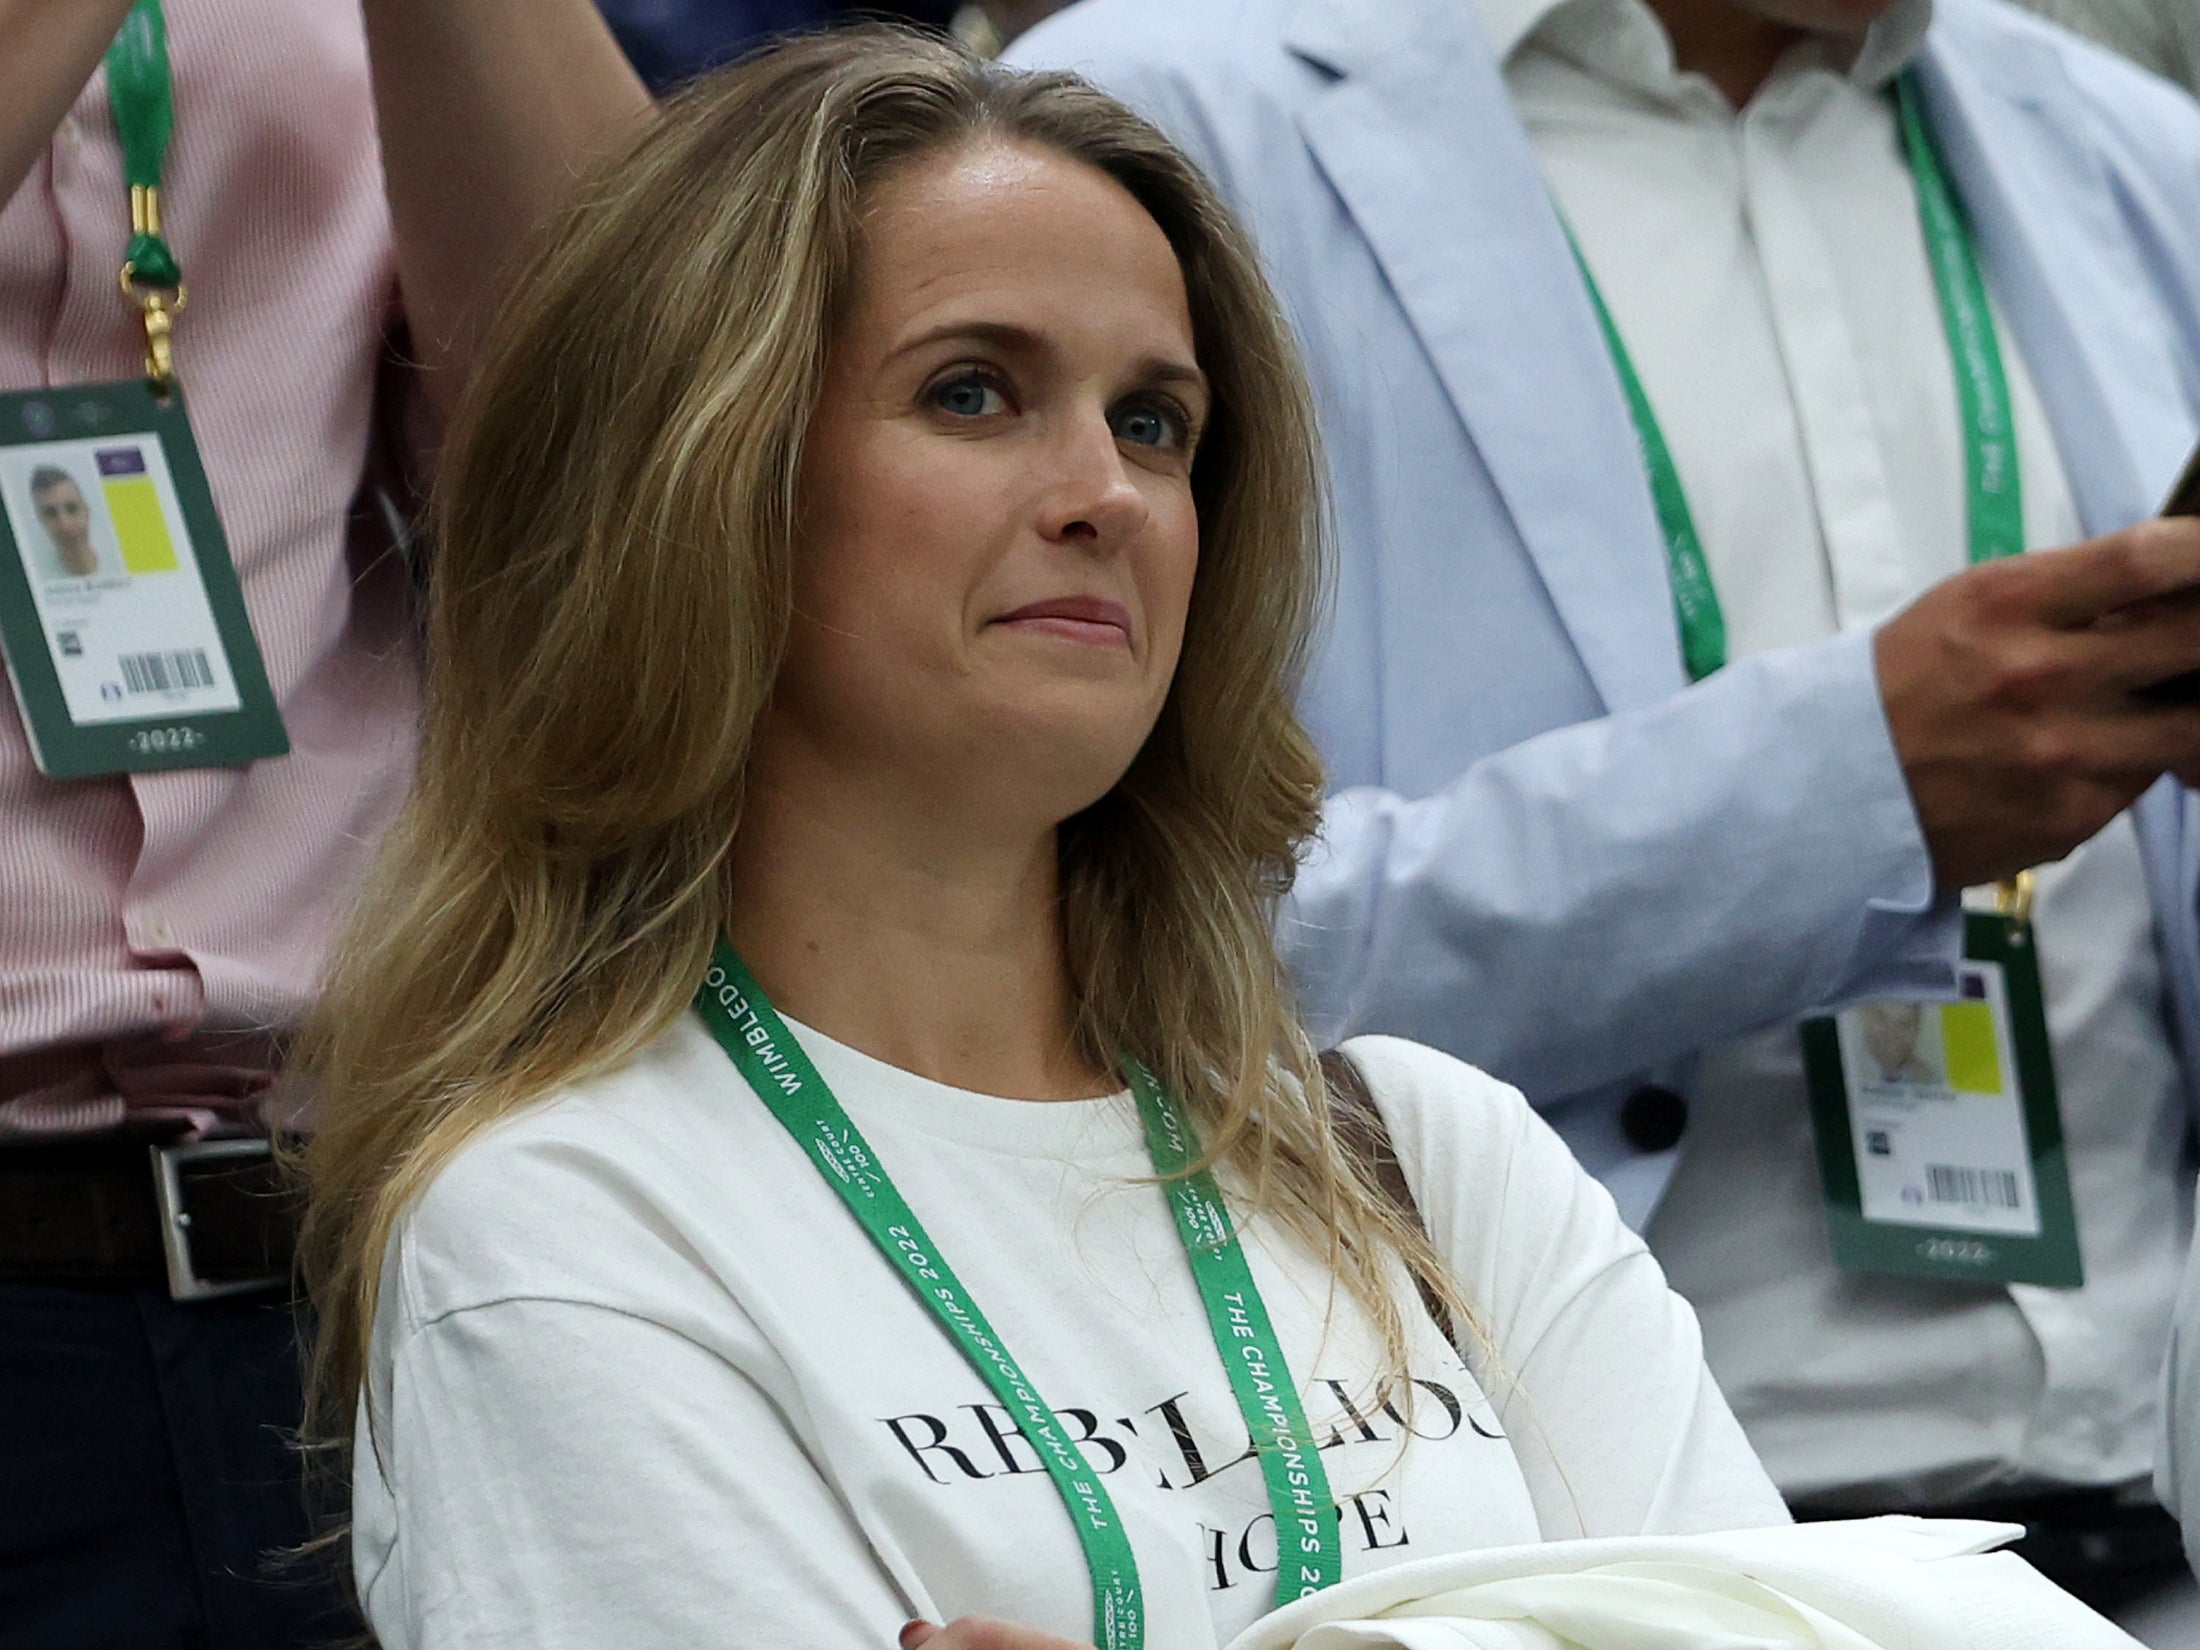 Andy Murray S Wife Kim Shows Support For Dame Deborah James At Wimbledon The Independent